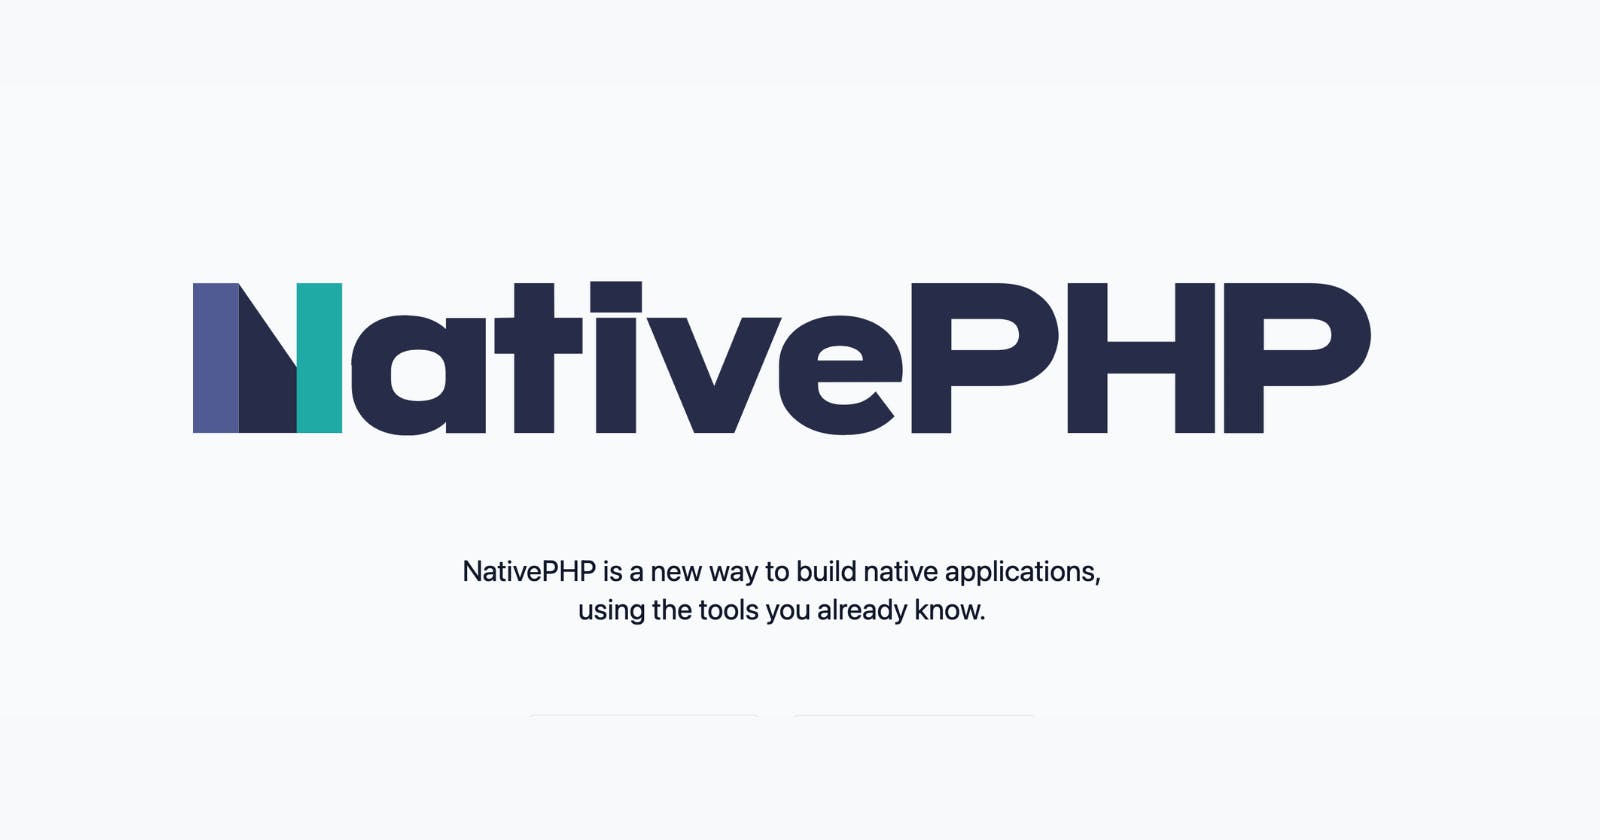 What is NativePHP?